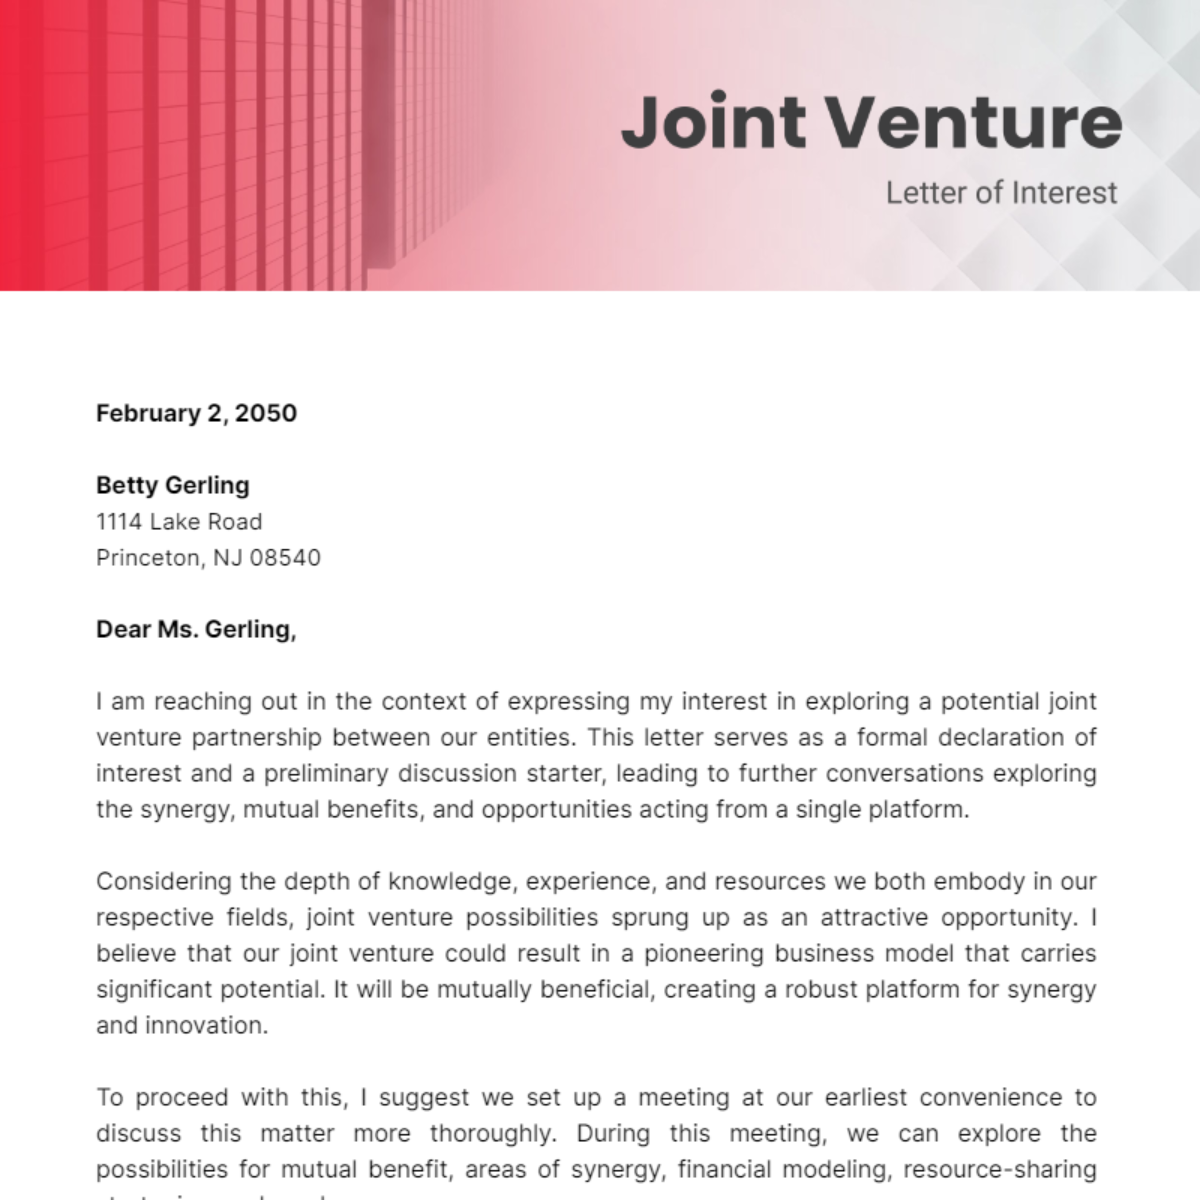 Joint Venture Letter of Interest Template